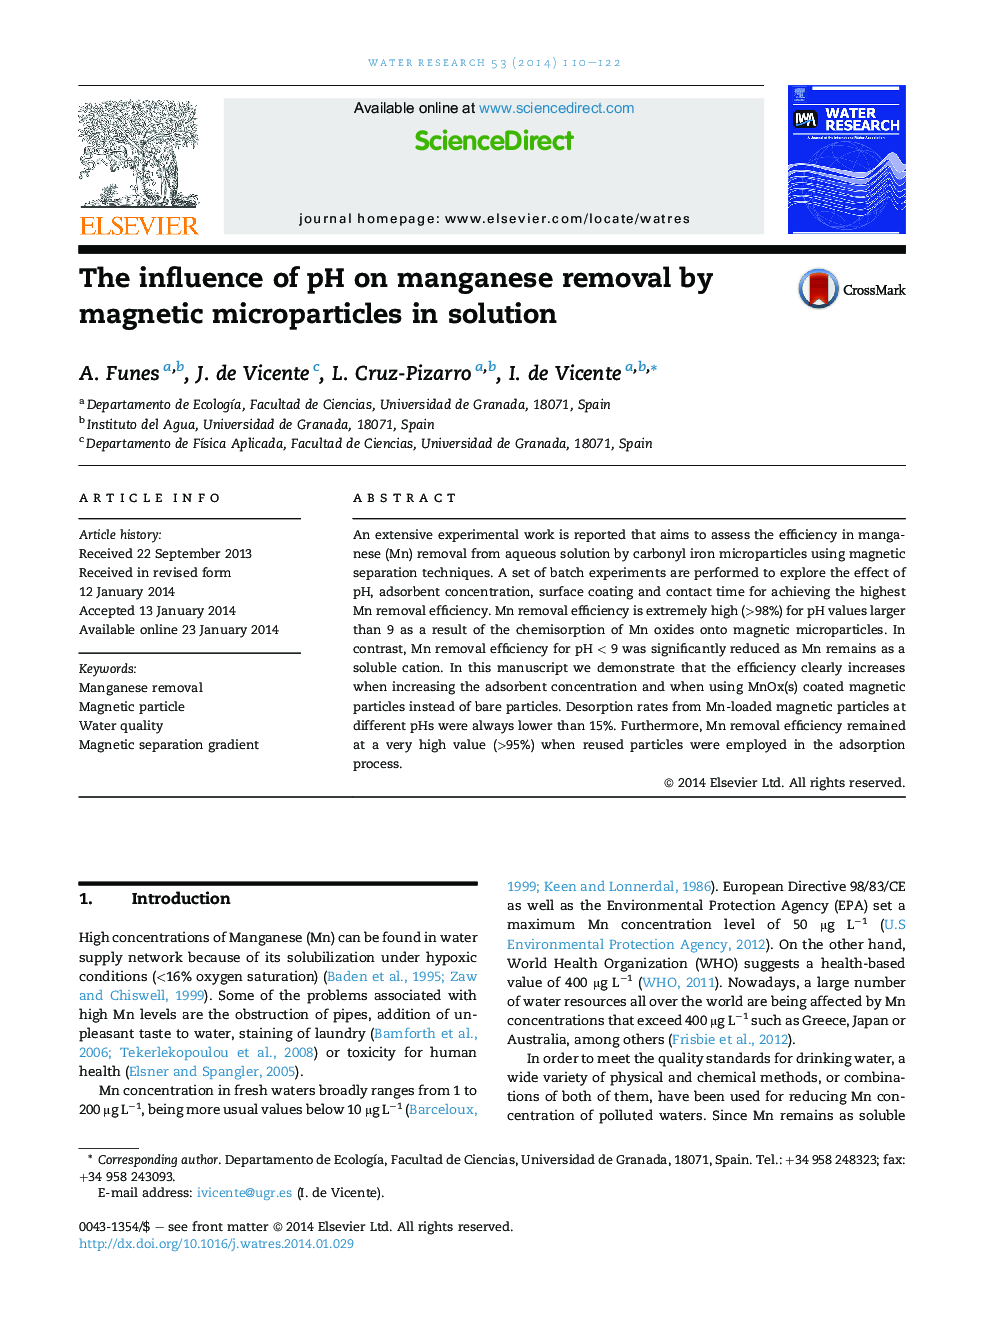 The influence of pH on manganese removal by magnetic microparticles in solution